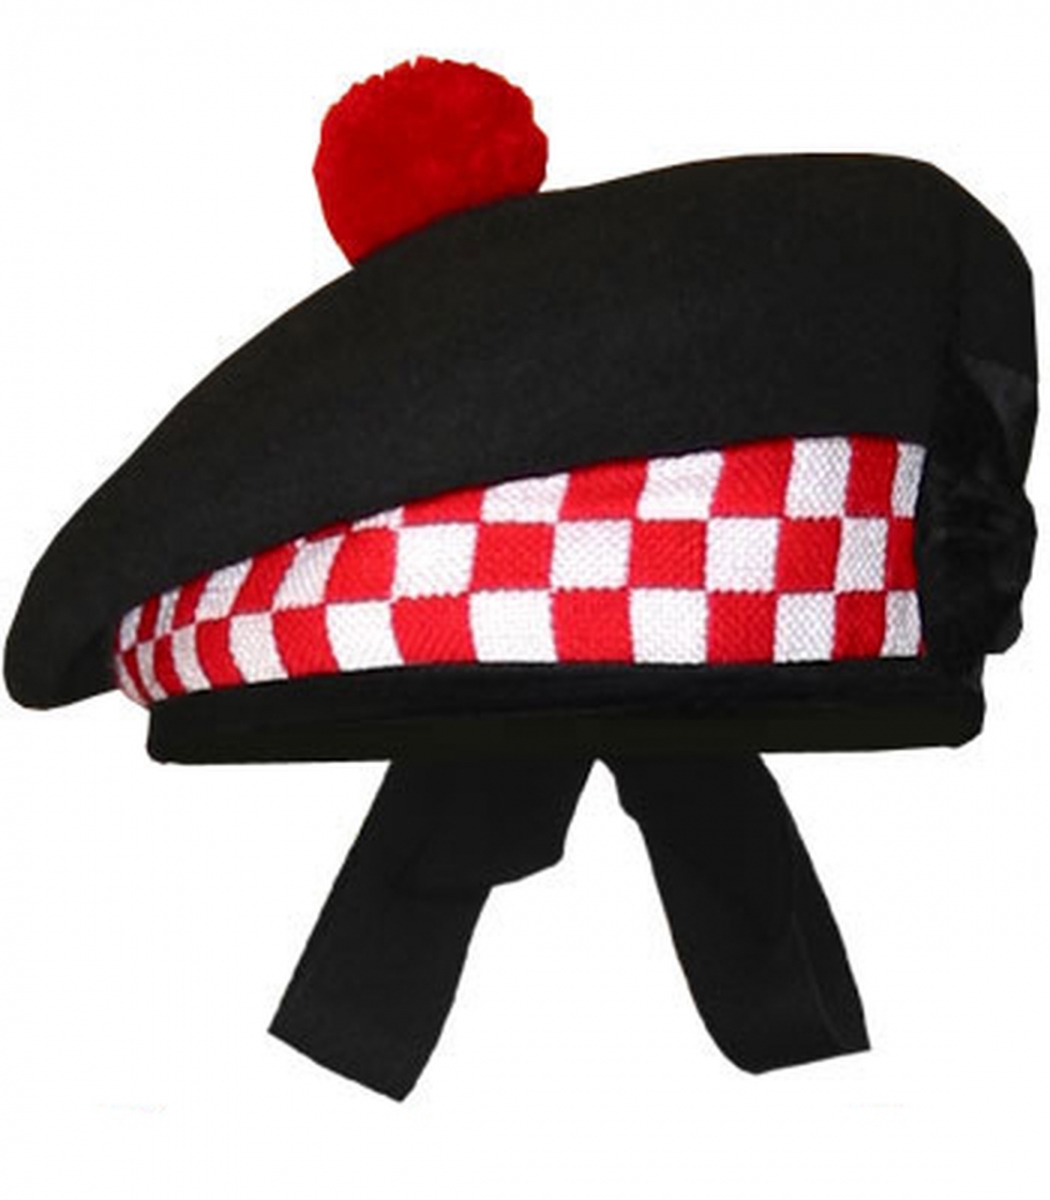 Pipe Band Balmoral Cap made of Wool White and Red Dicing.